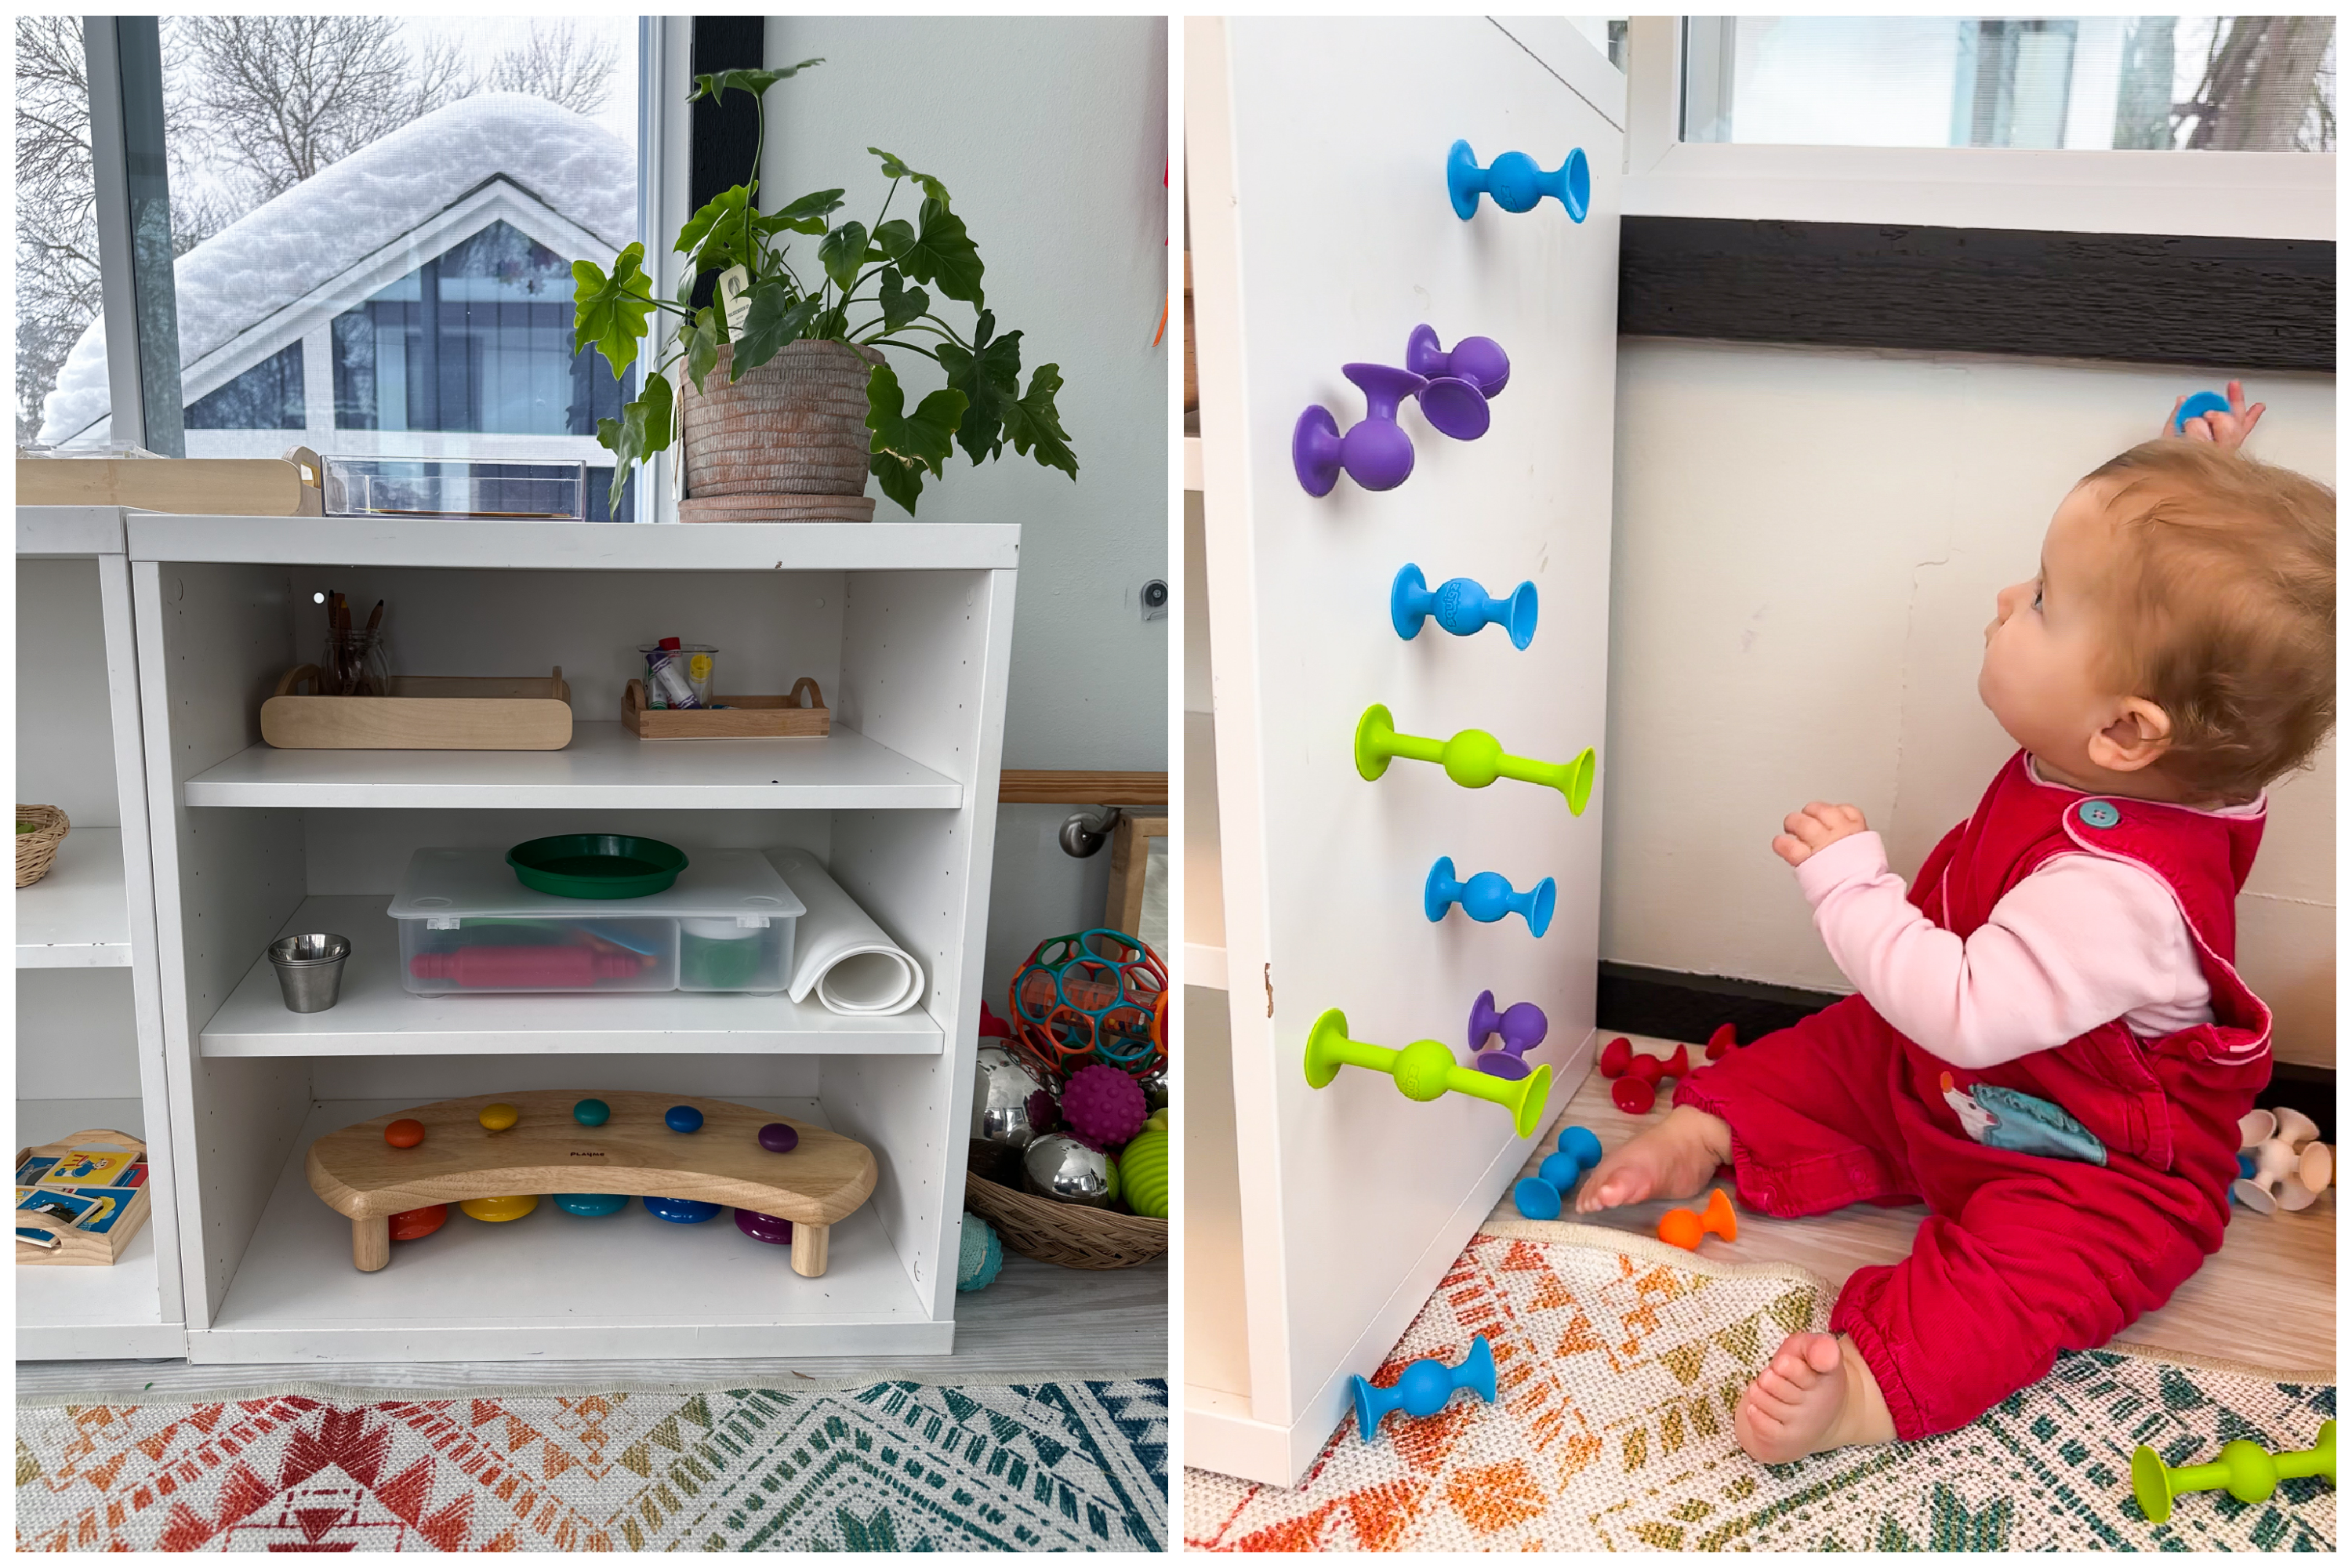 Padable - Gallery  Toddler and baby room, Toddler proofing